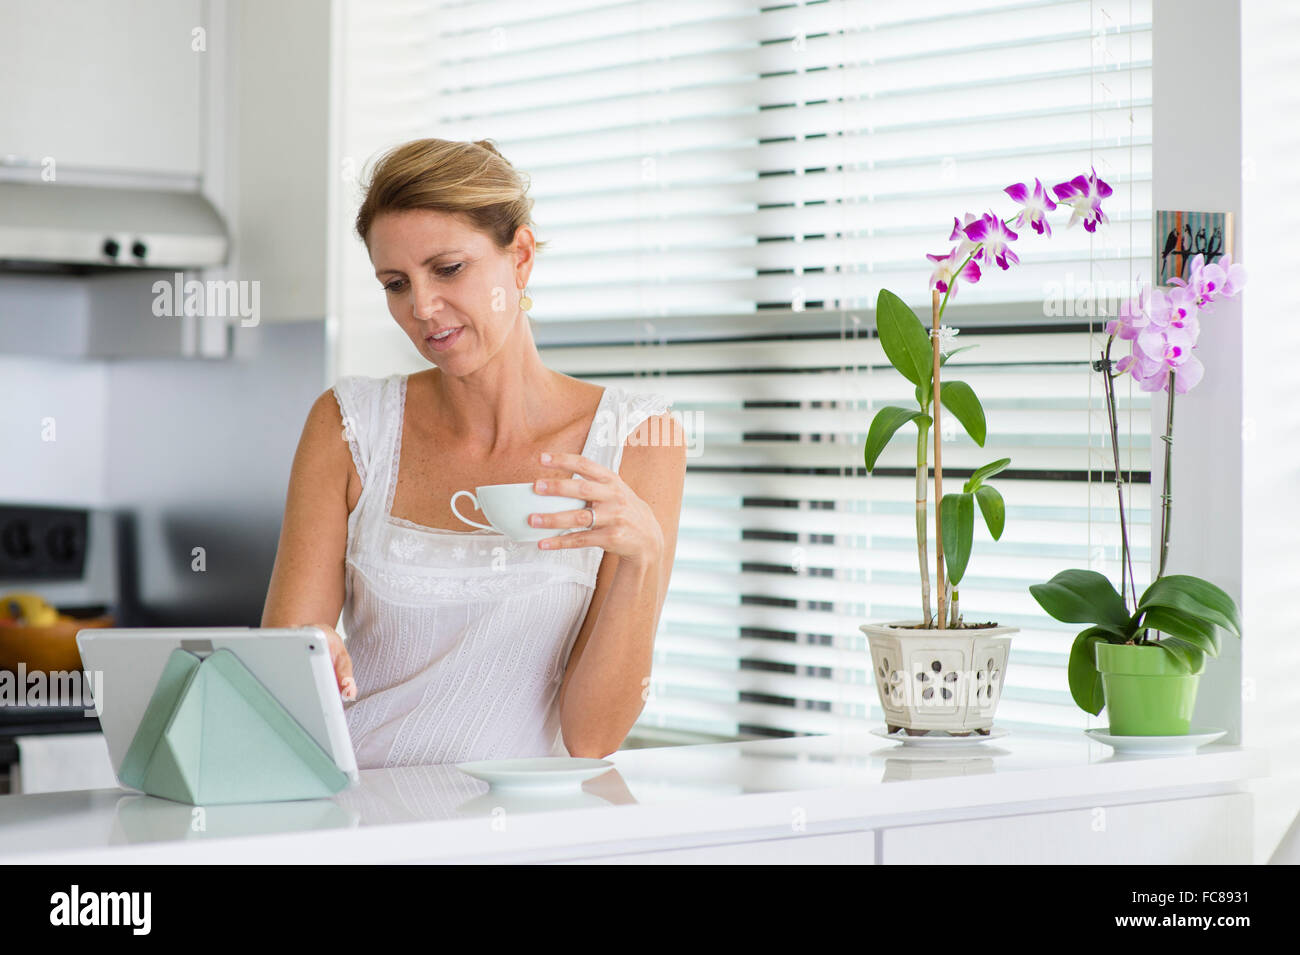 Caucasian woman using digital tablet in kitchen Stock Photo